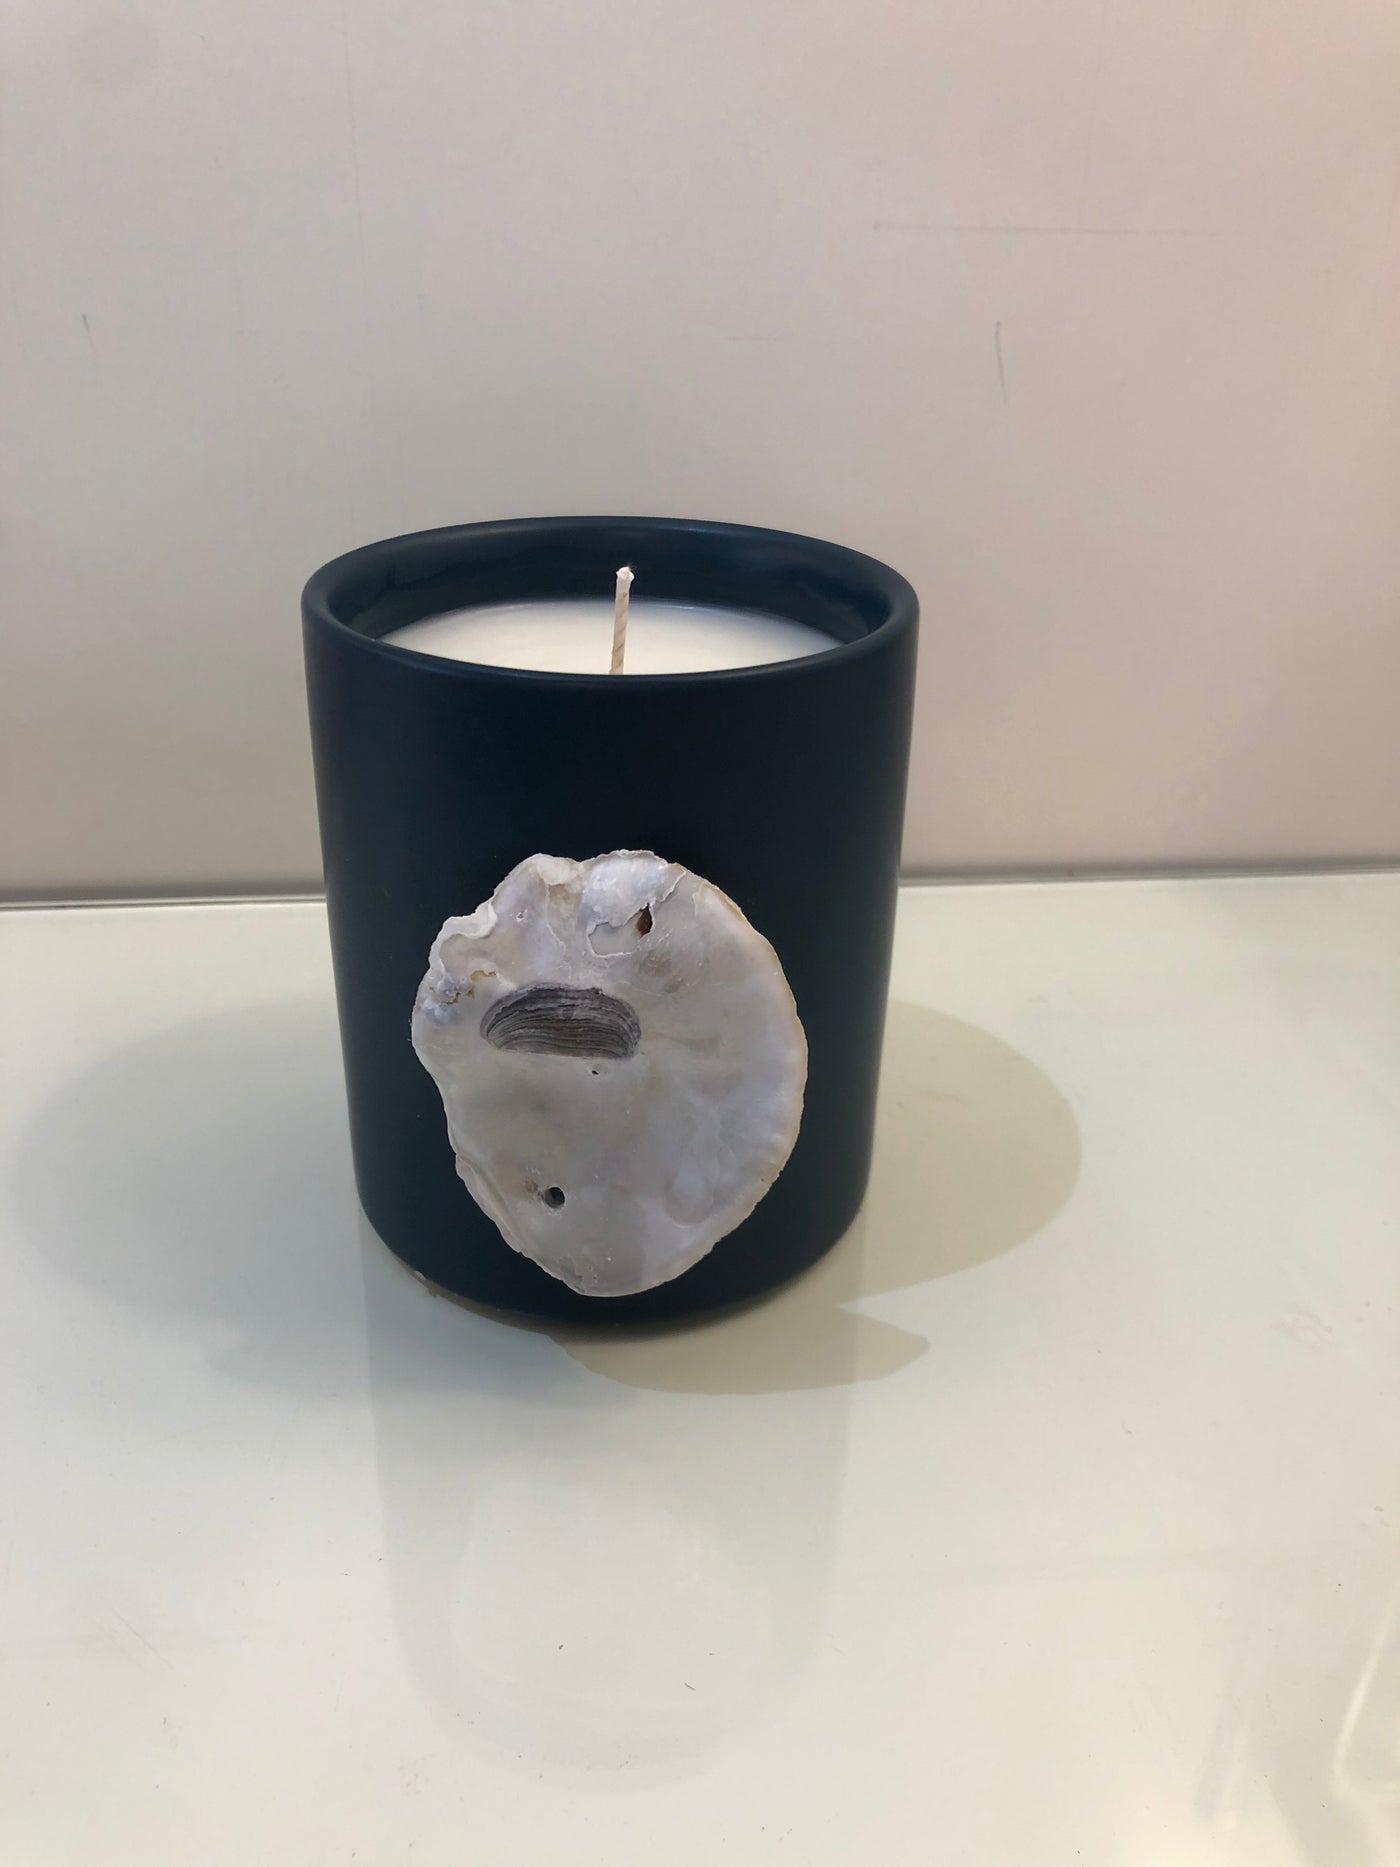 Bubbles Candle Co. Oyster Candles - 12 oz Black or Navy Candle Vessel